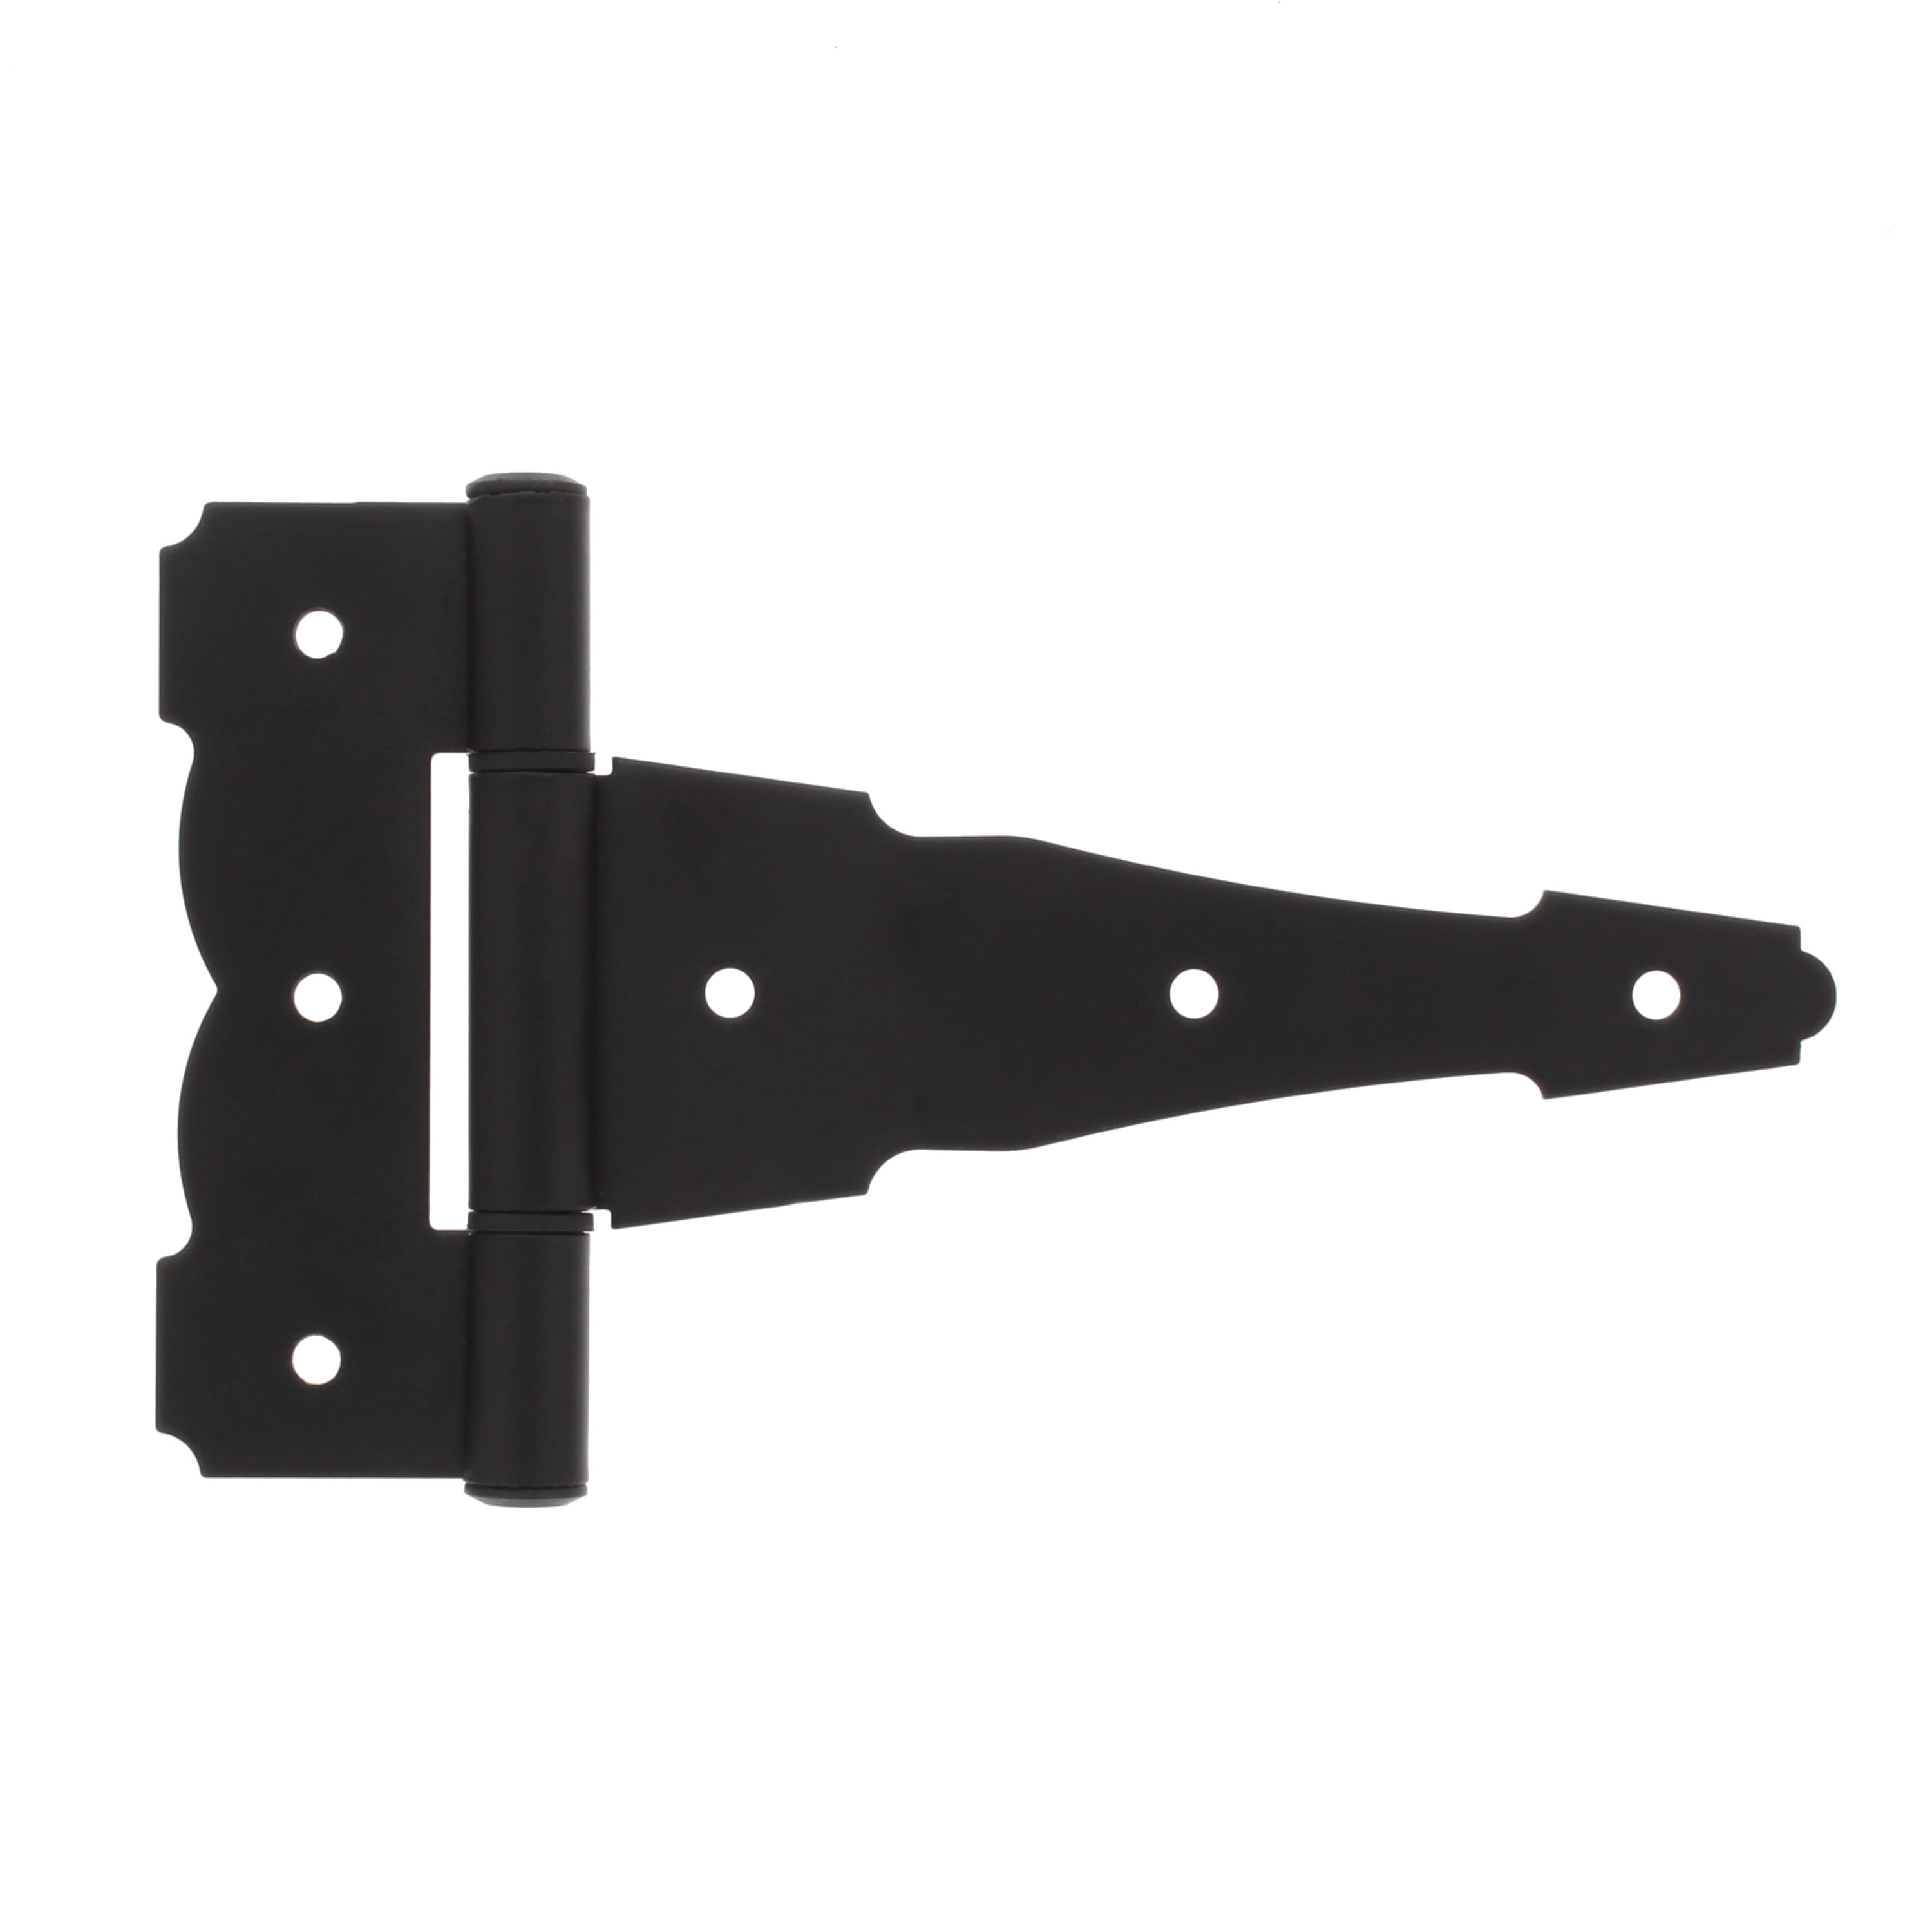 Tee Hinges Black Decorative Heavy Duty Strap T Hinge Door Gate Shed  Pair or One 